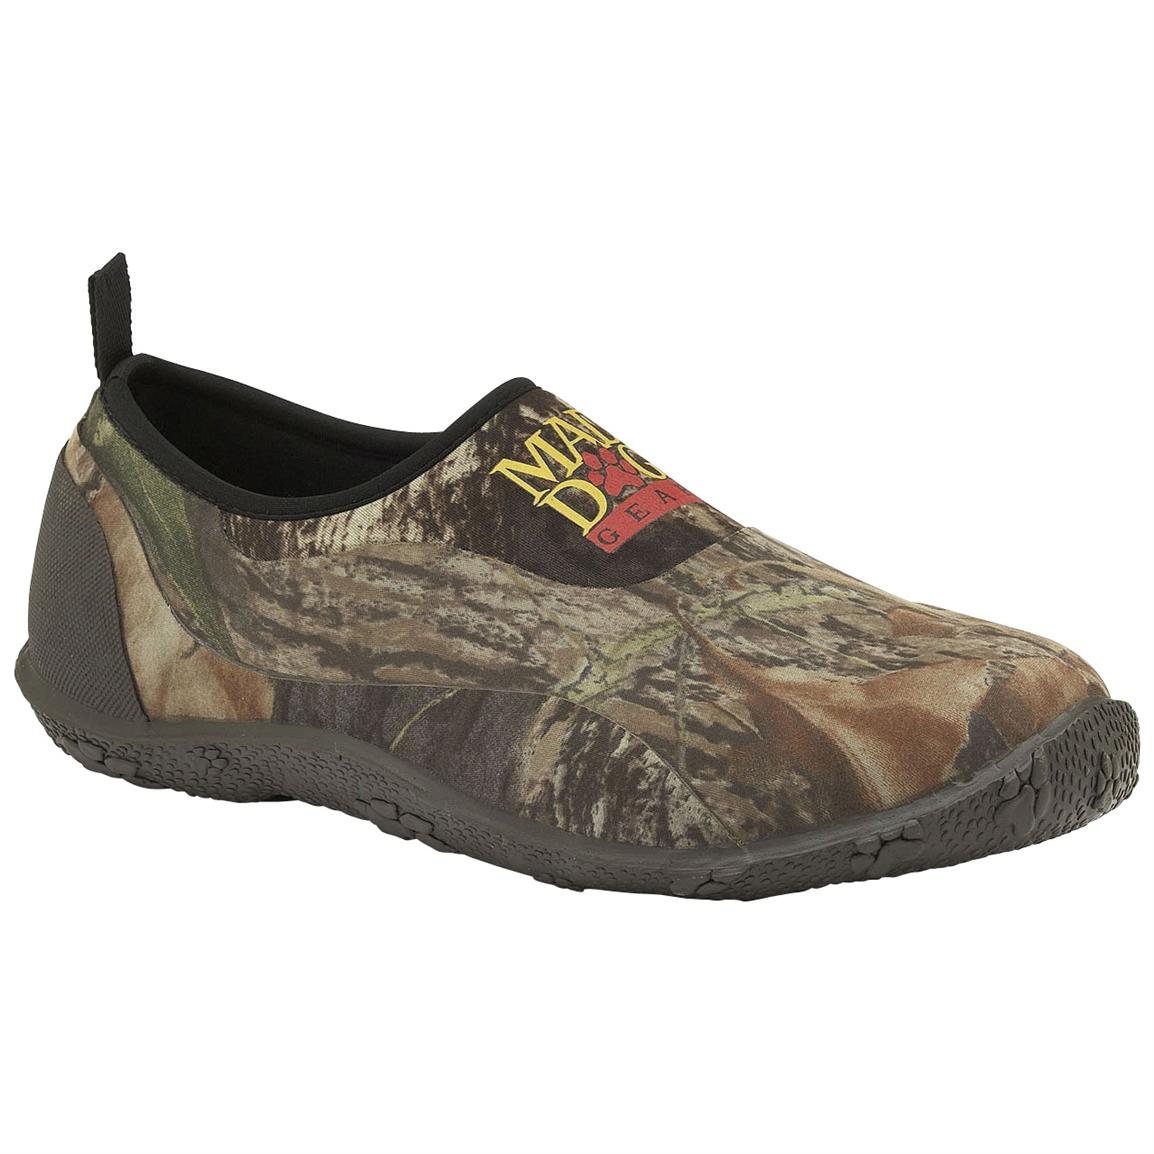 Mad Dog Gear® Camp Moc Shoes - 120208, Casual Shoes at Sportsman's Guide